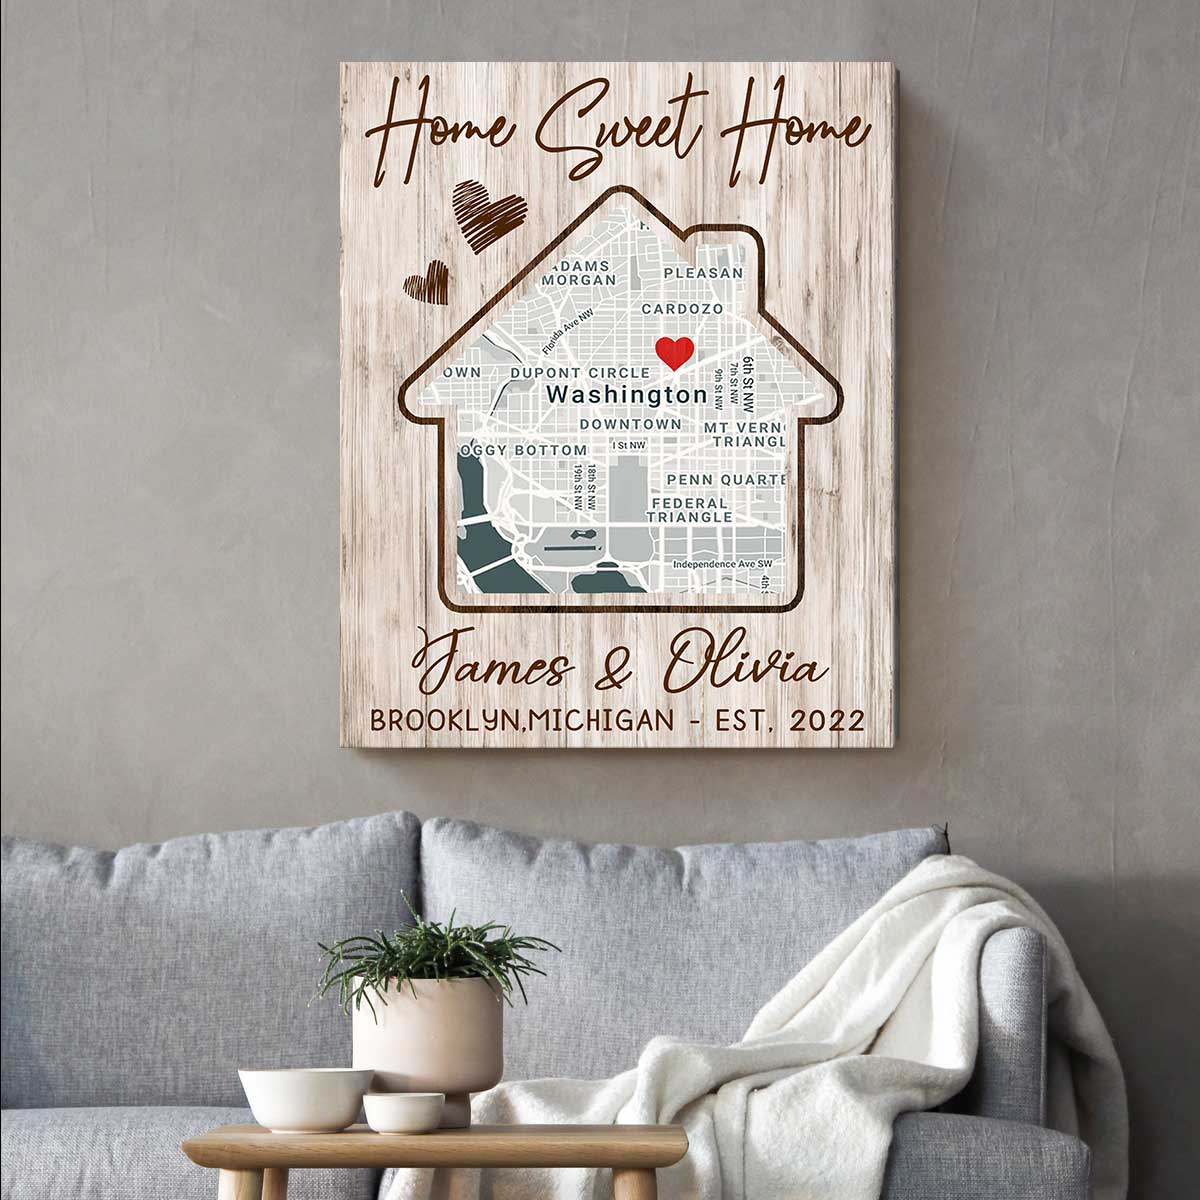 https://benicee.com/wp-content/uploads/2022/09/Best-Housewarming-Gifts-Gifts-for-New-Homeowners-Our-First-Home-Custom-Map-Print-New-House-Gifts-5.jpeg